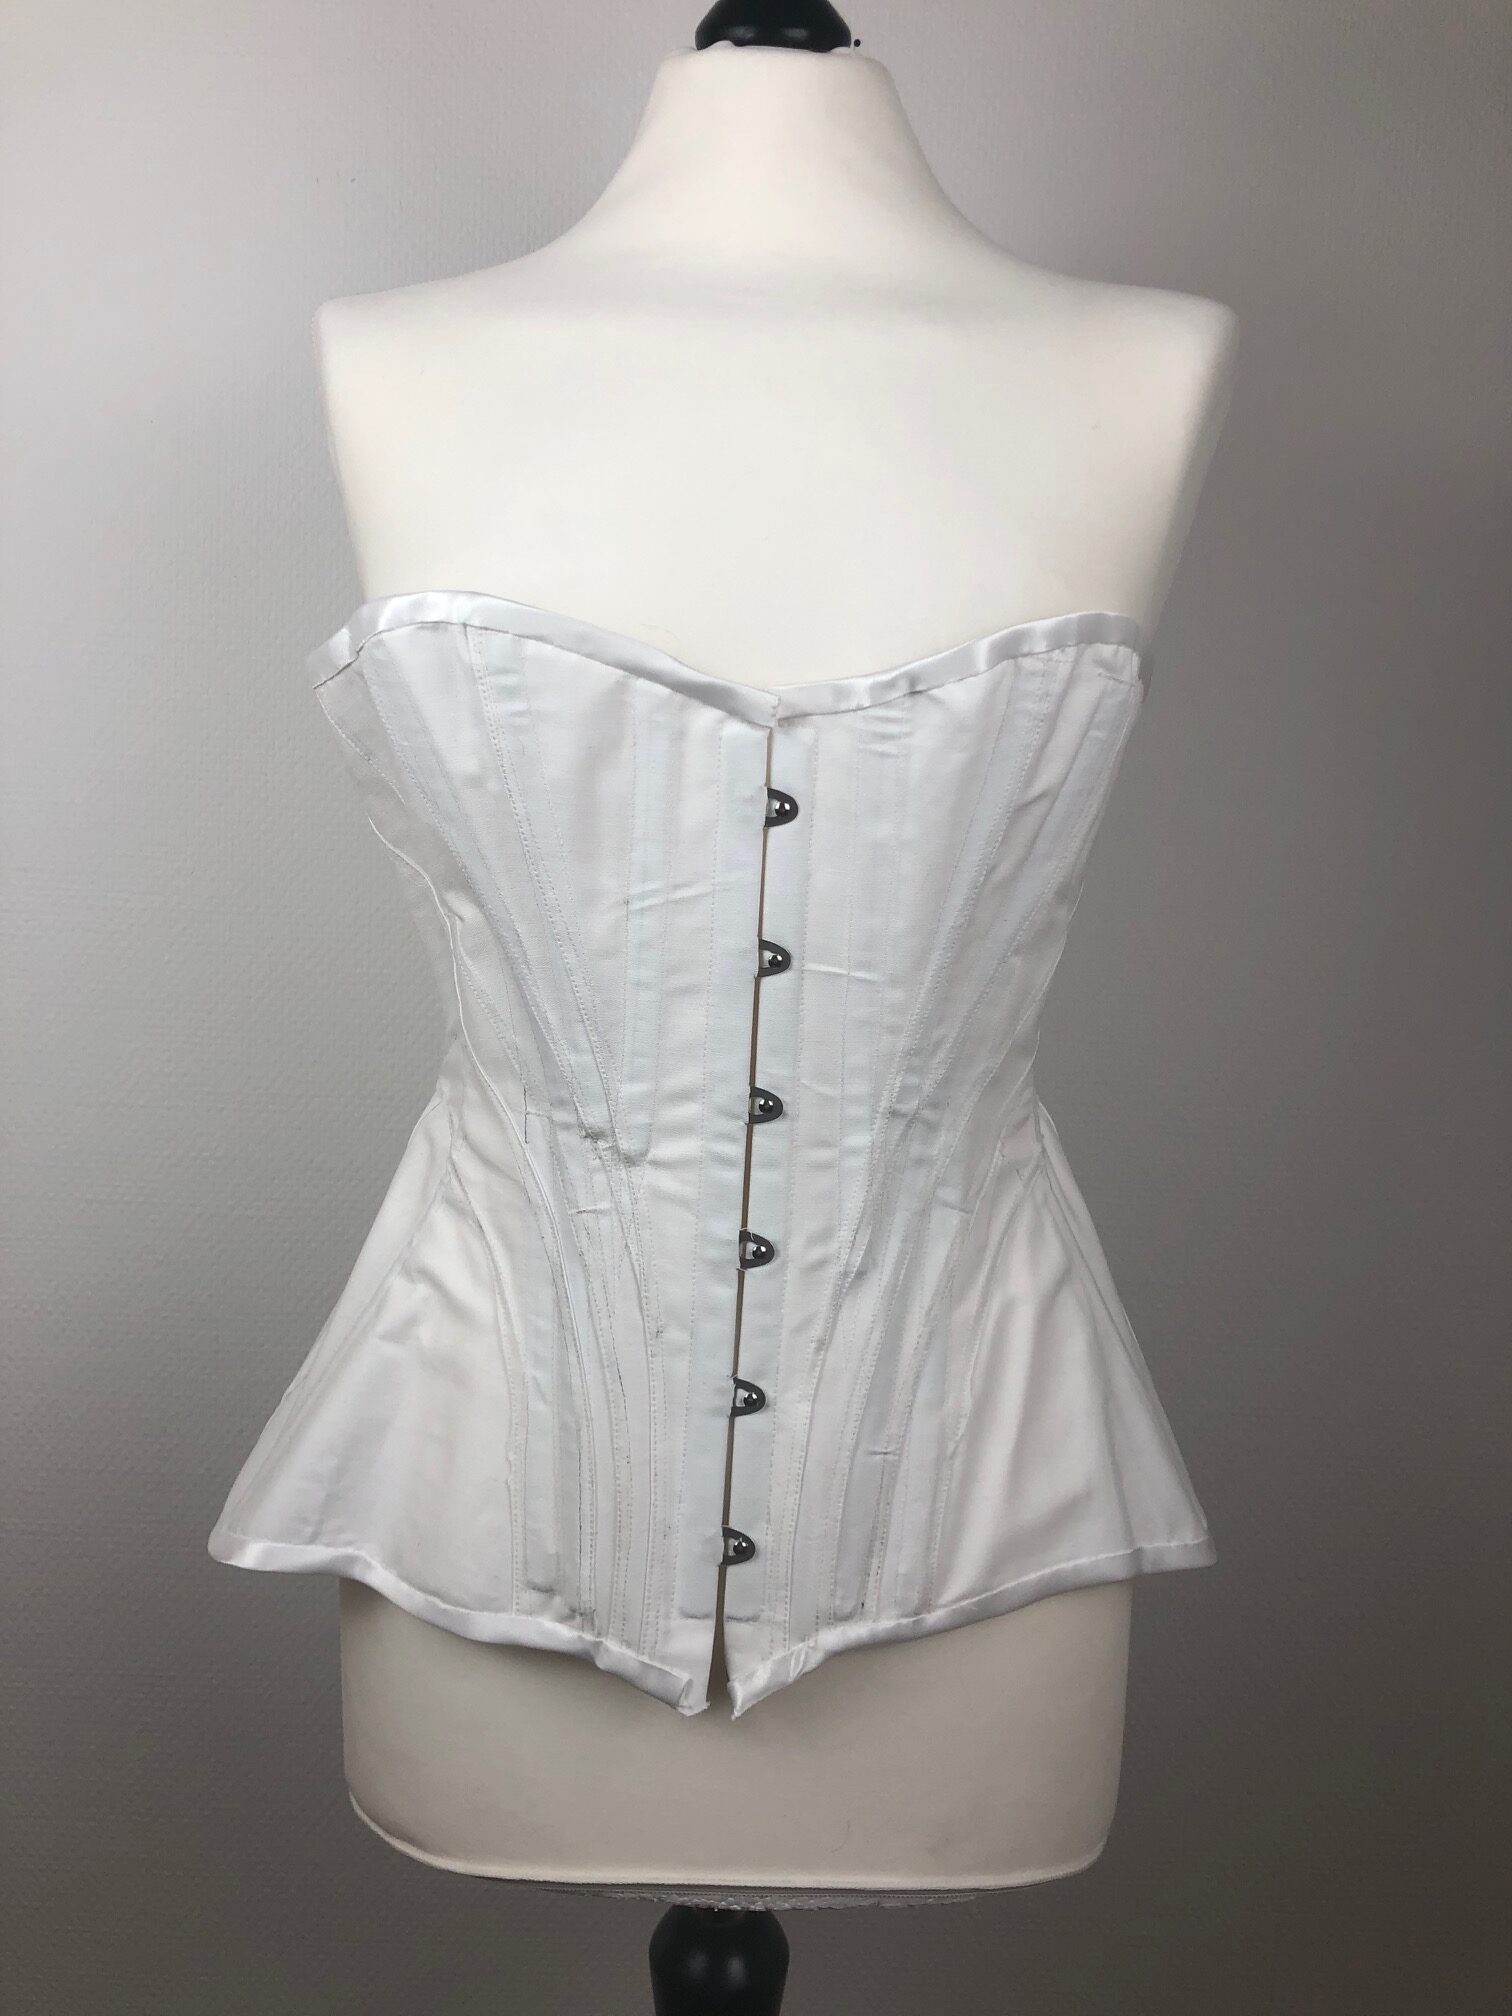 An introduction to corsets, patterns and fitting